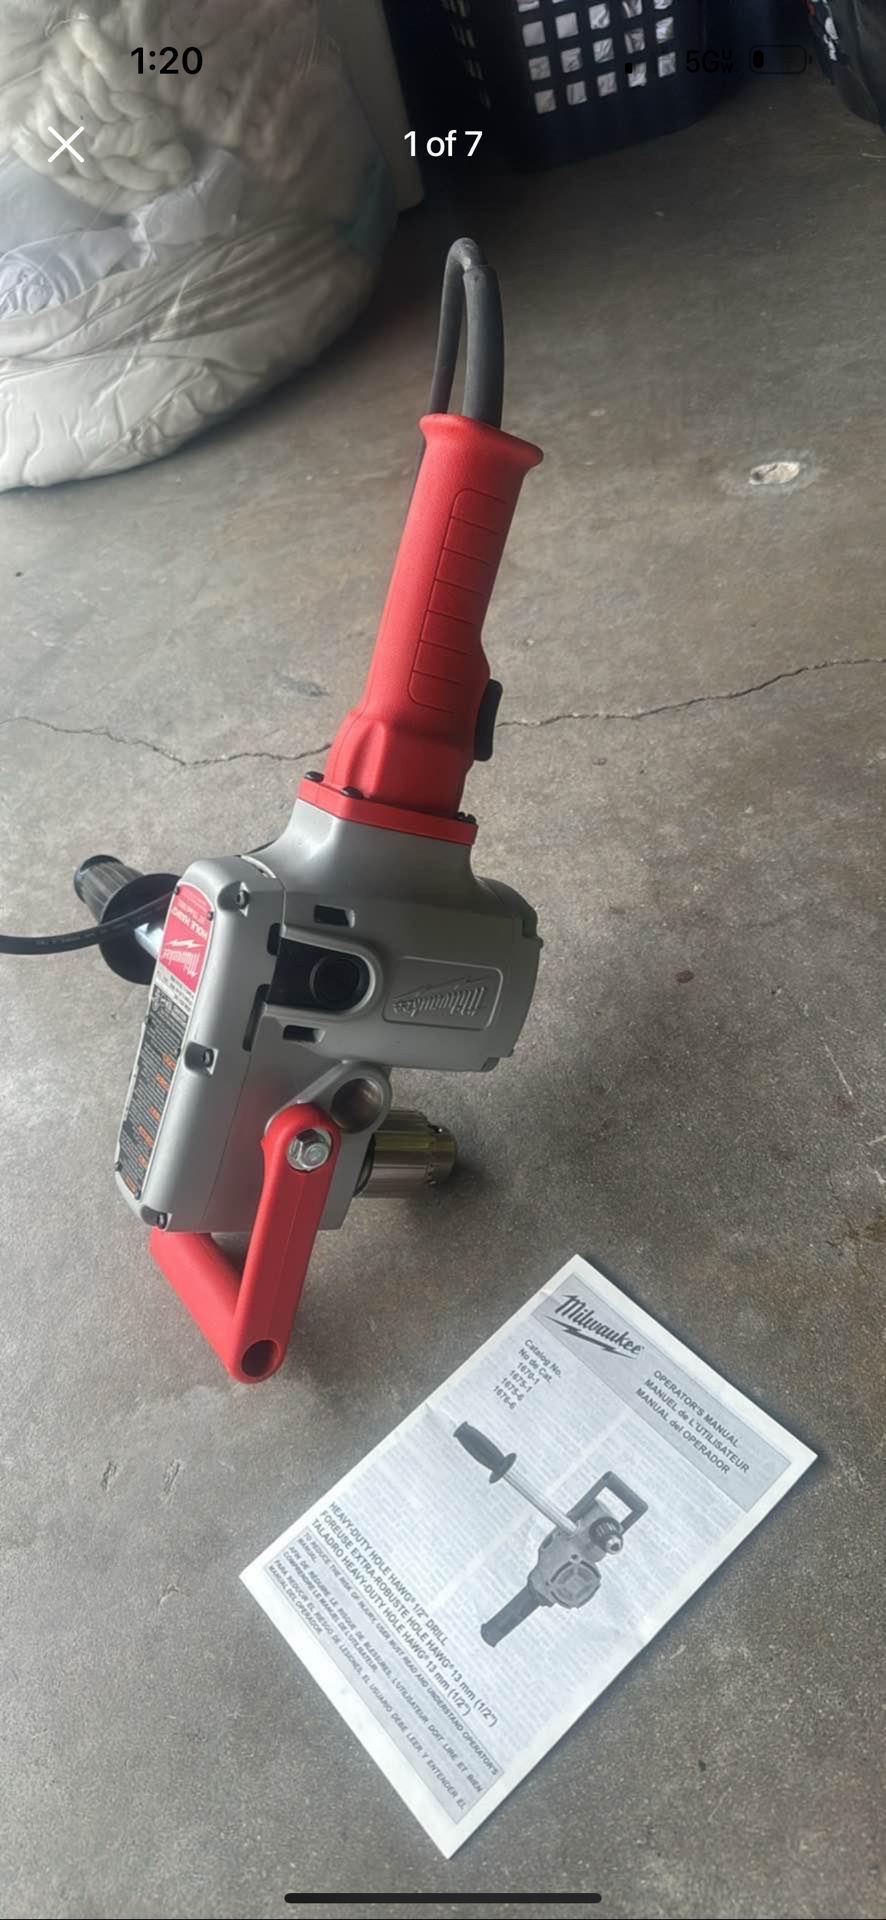 7.5 amp in hole Hawg Heavy Duty  Drill (brand new)